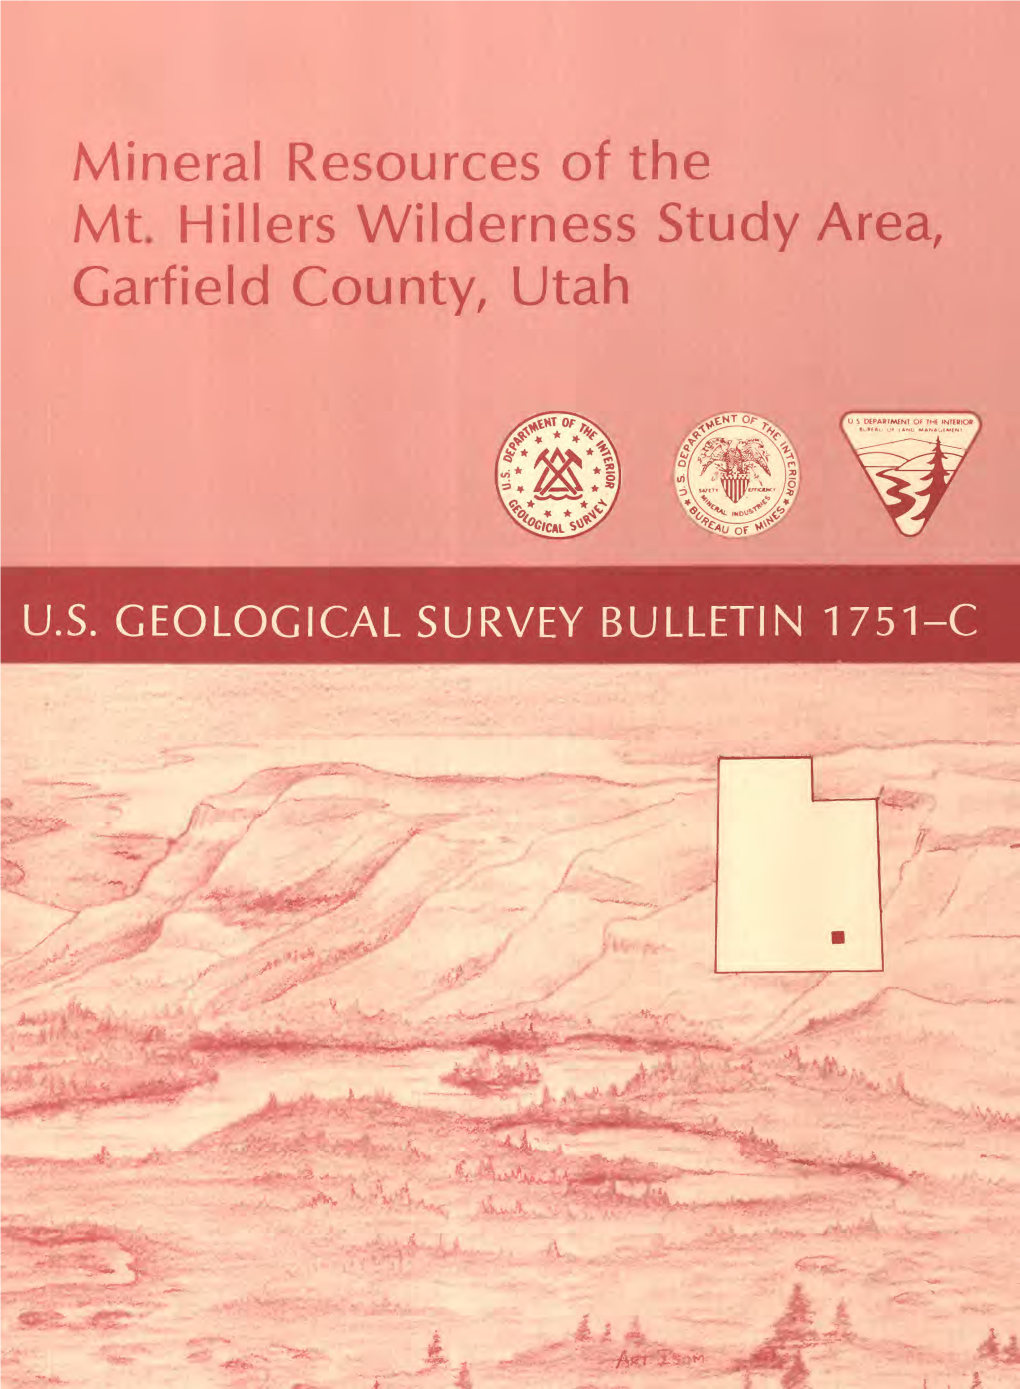 Mineral Resources of the Mt. Millers Wilderness Study Area, Garfield County, Utah